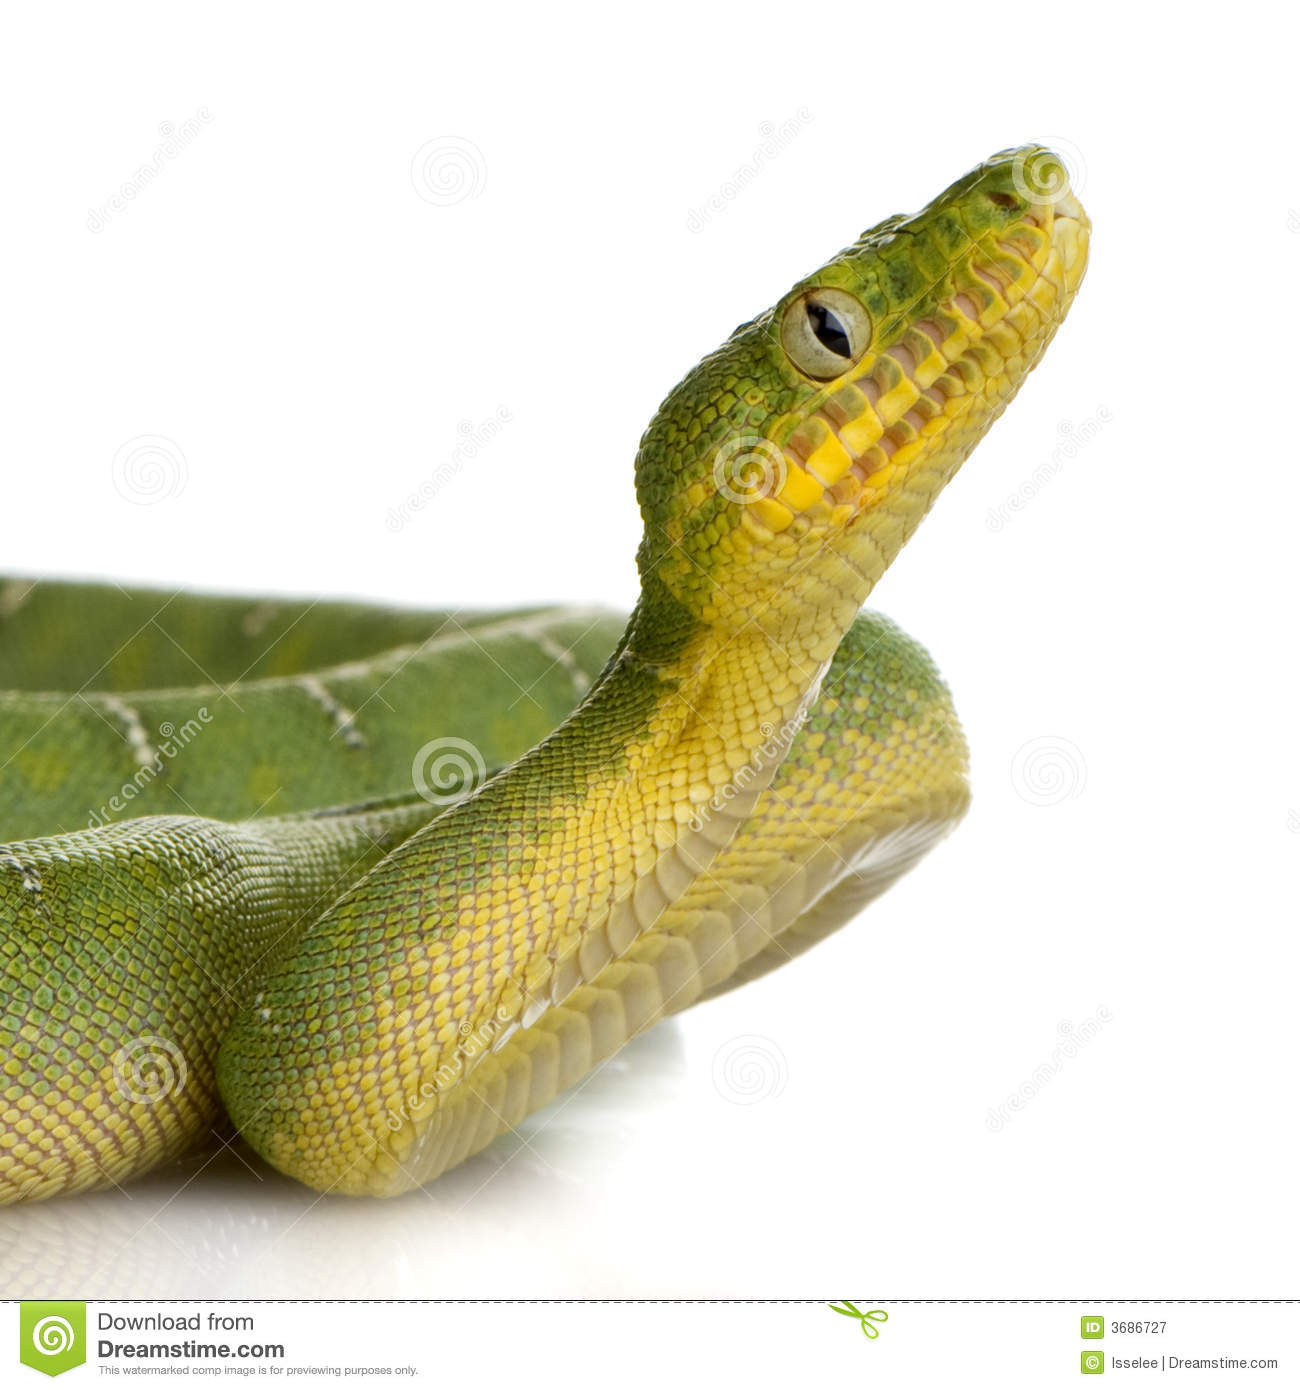 Emerald Tree Boa clipart #12, Download drawings